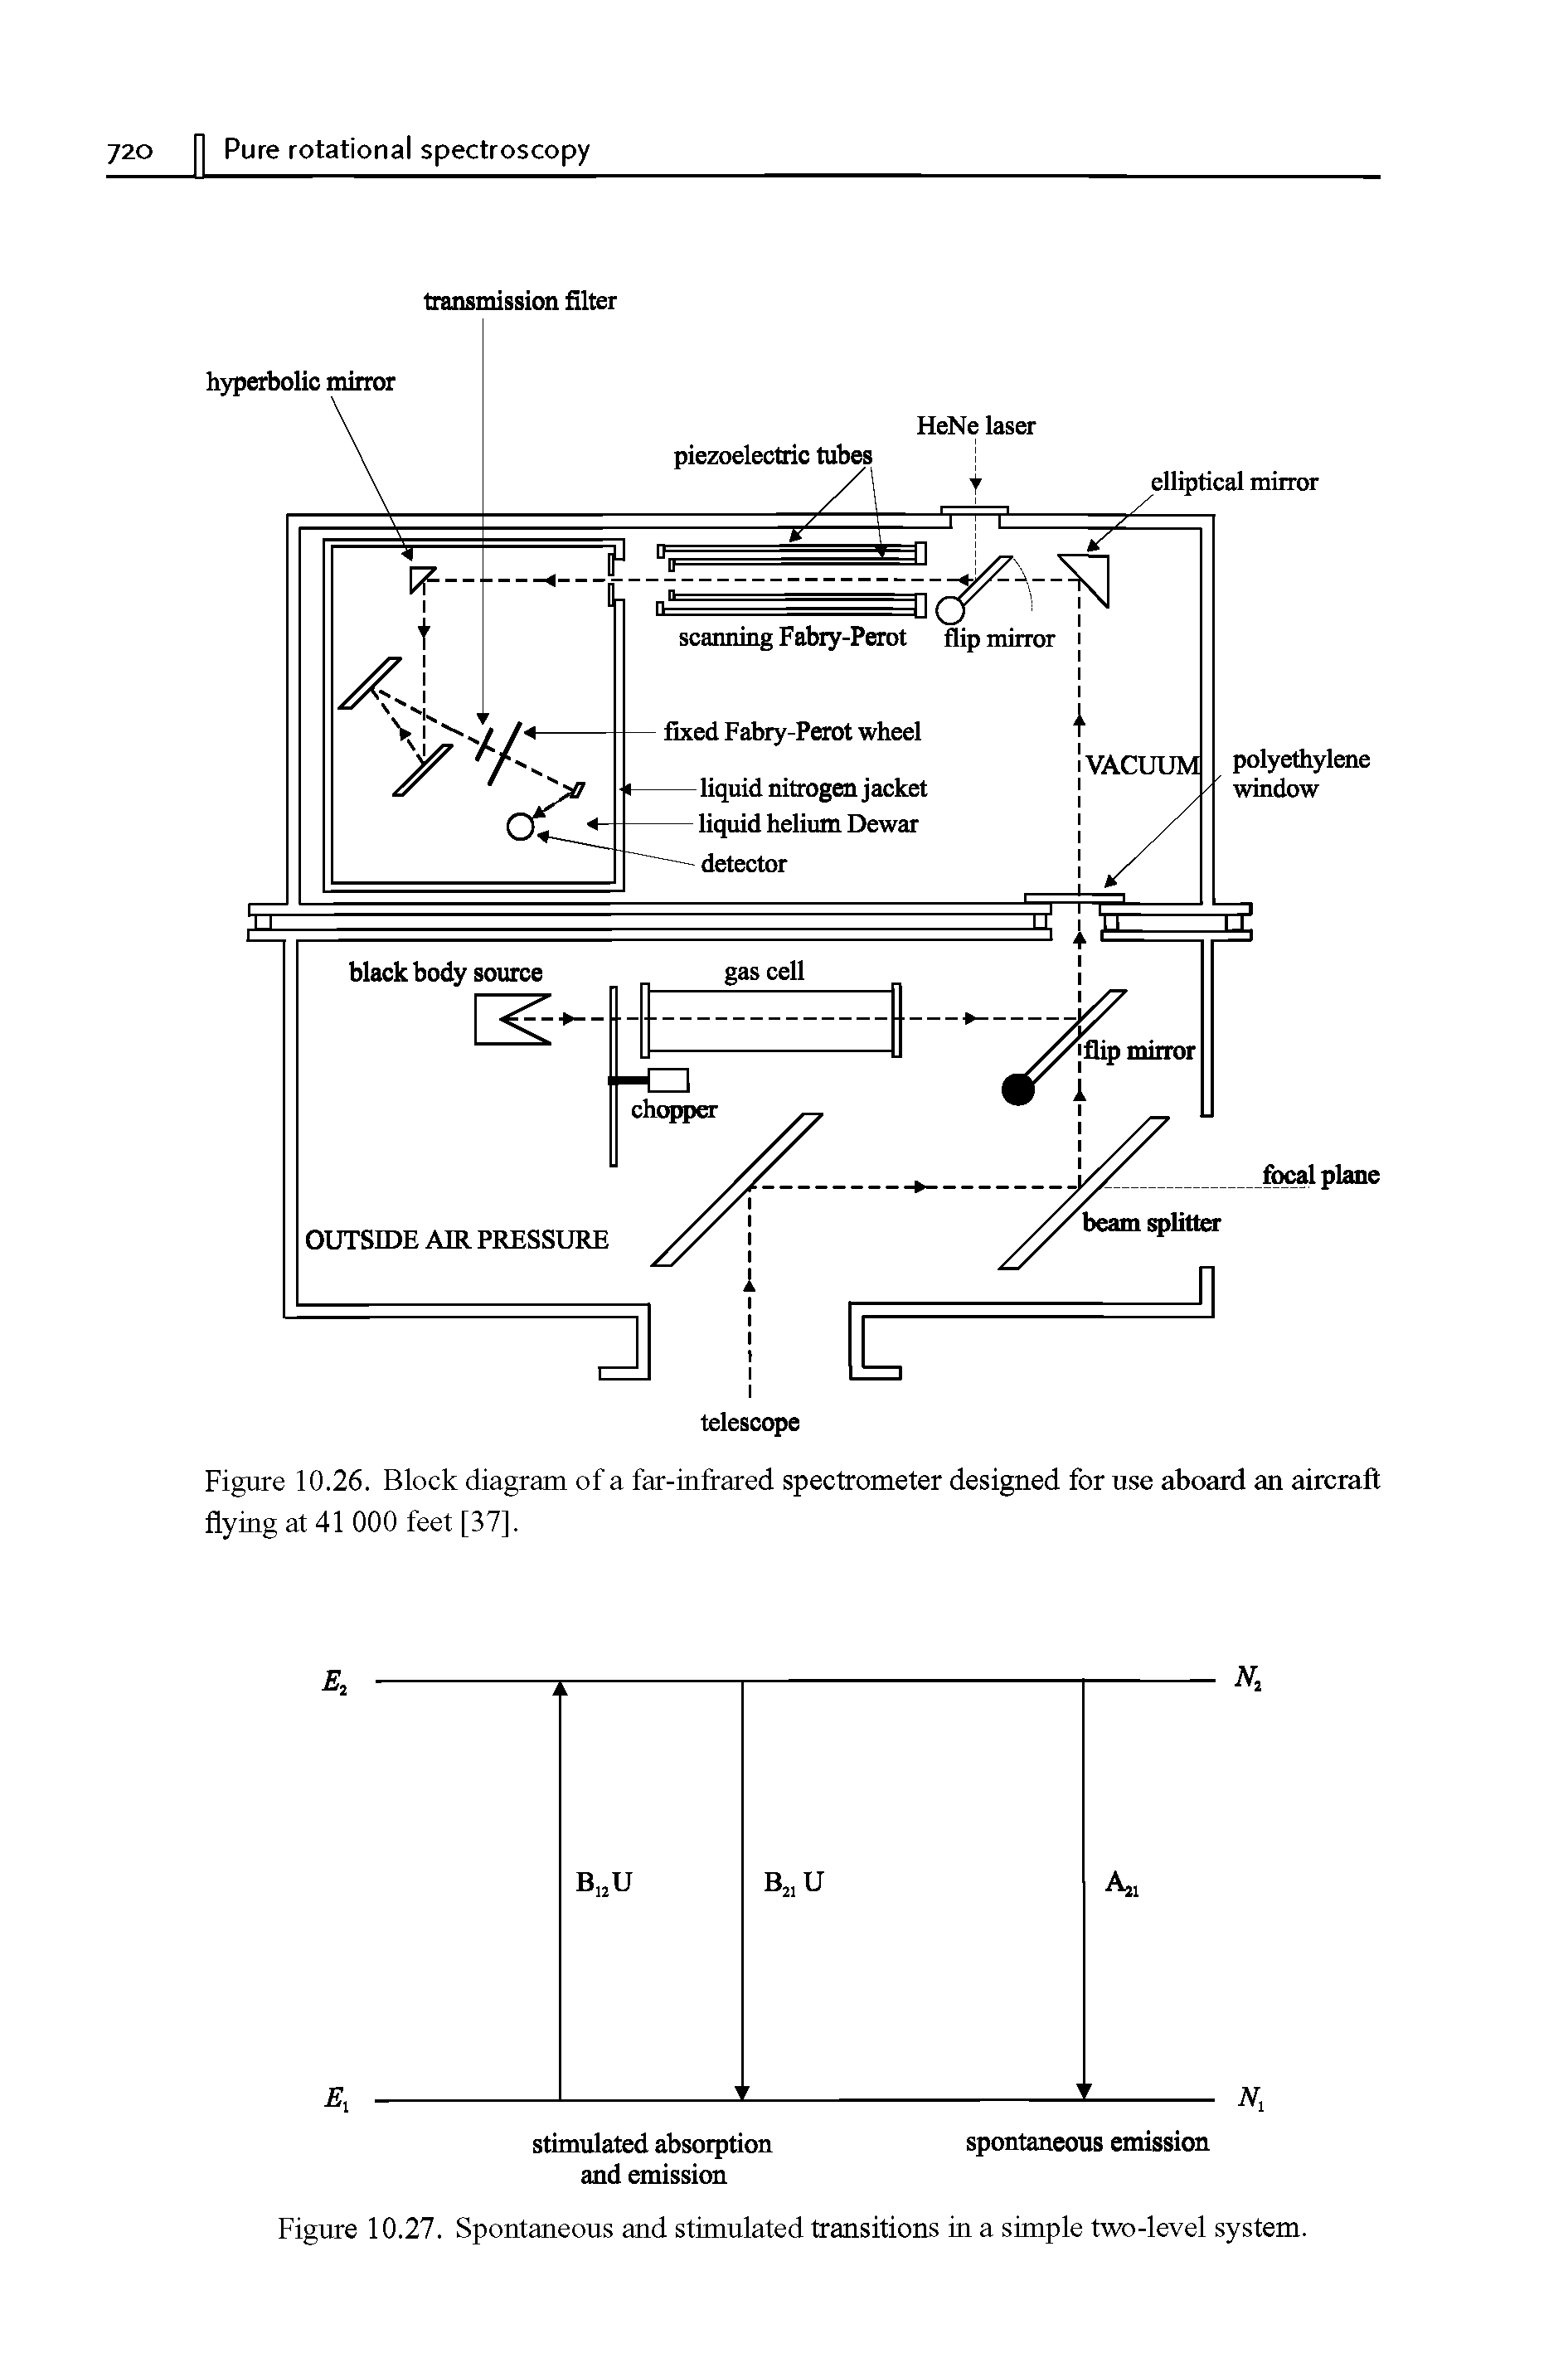 Figure 10.26. Block diagram of a far-infrared spectrometer designed for use aboard an aircraft flying at 41 000 feet [37],...